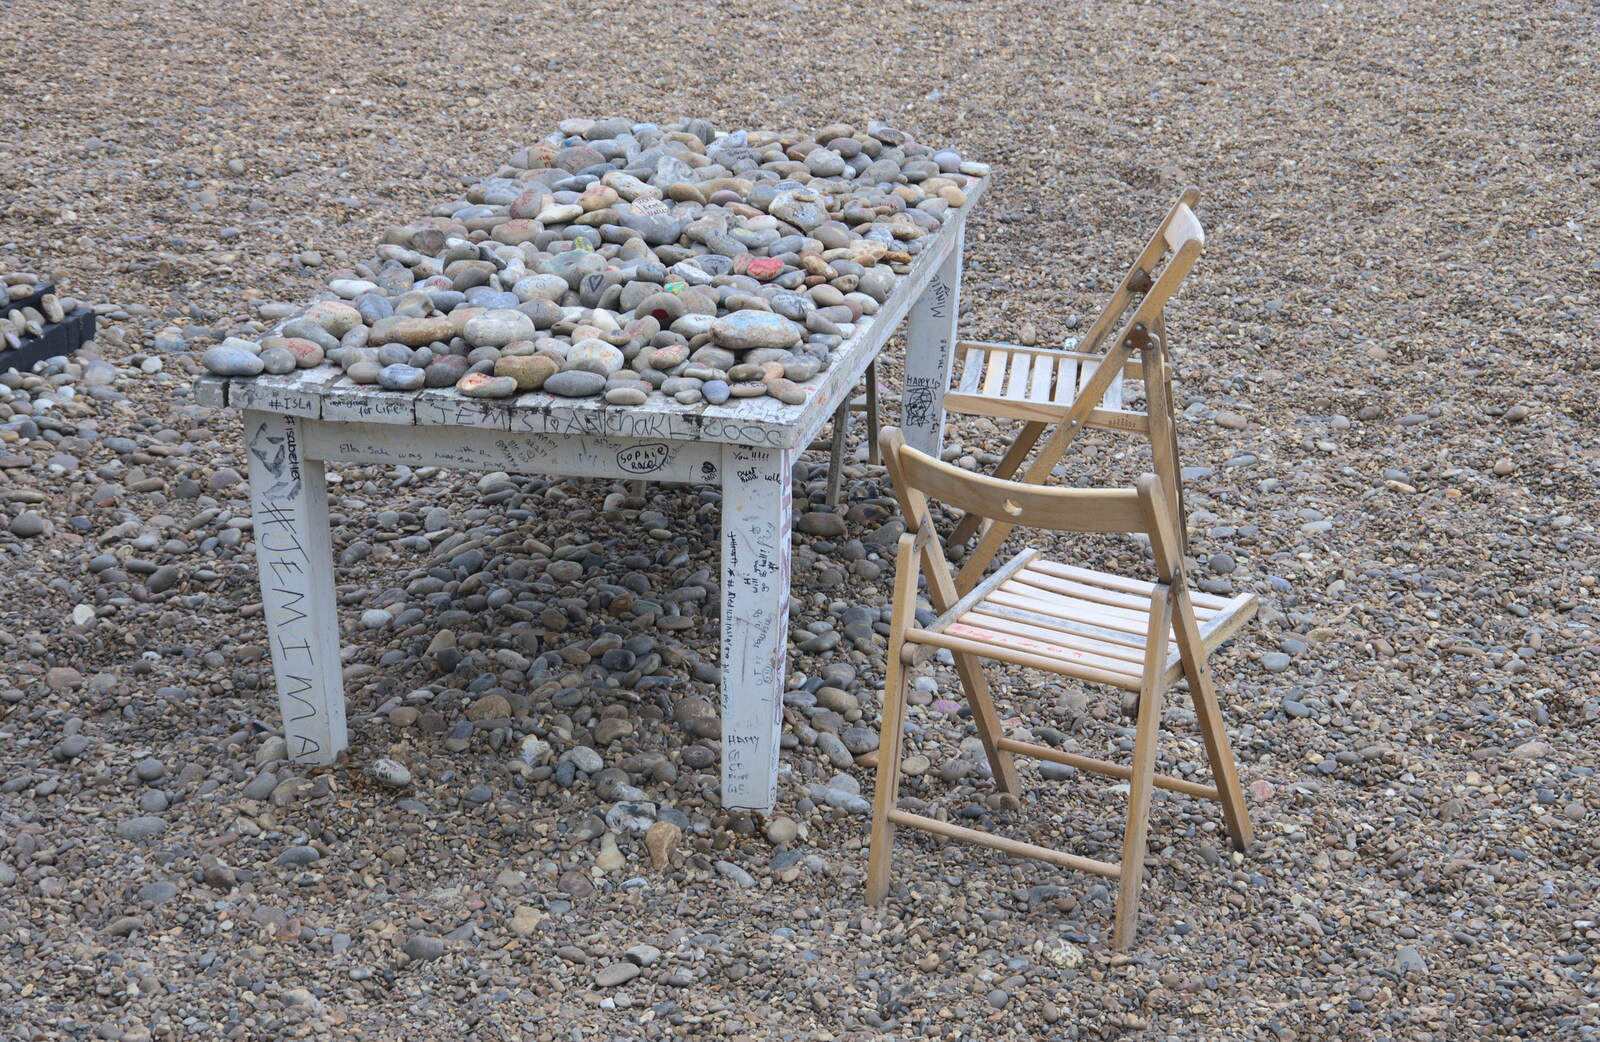 The table of pebbles almost disappears from A Postcard from Aldeburgh, Suffolk - 6th January 2019